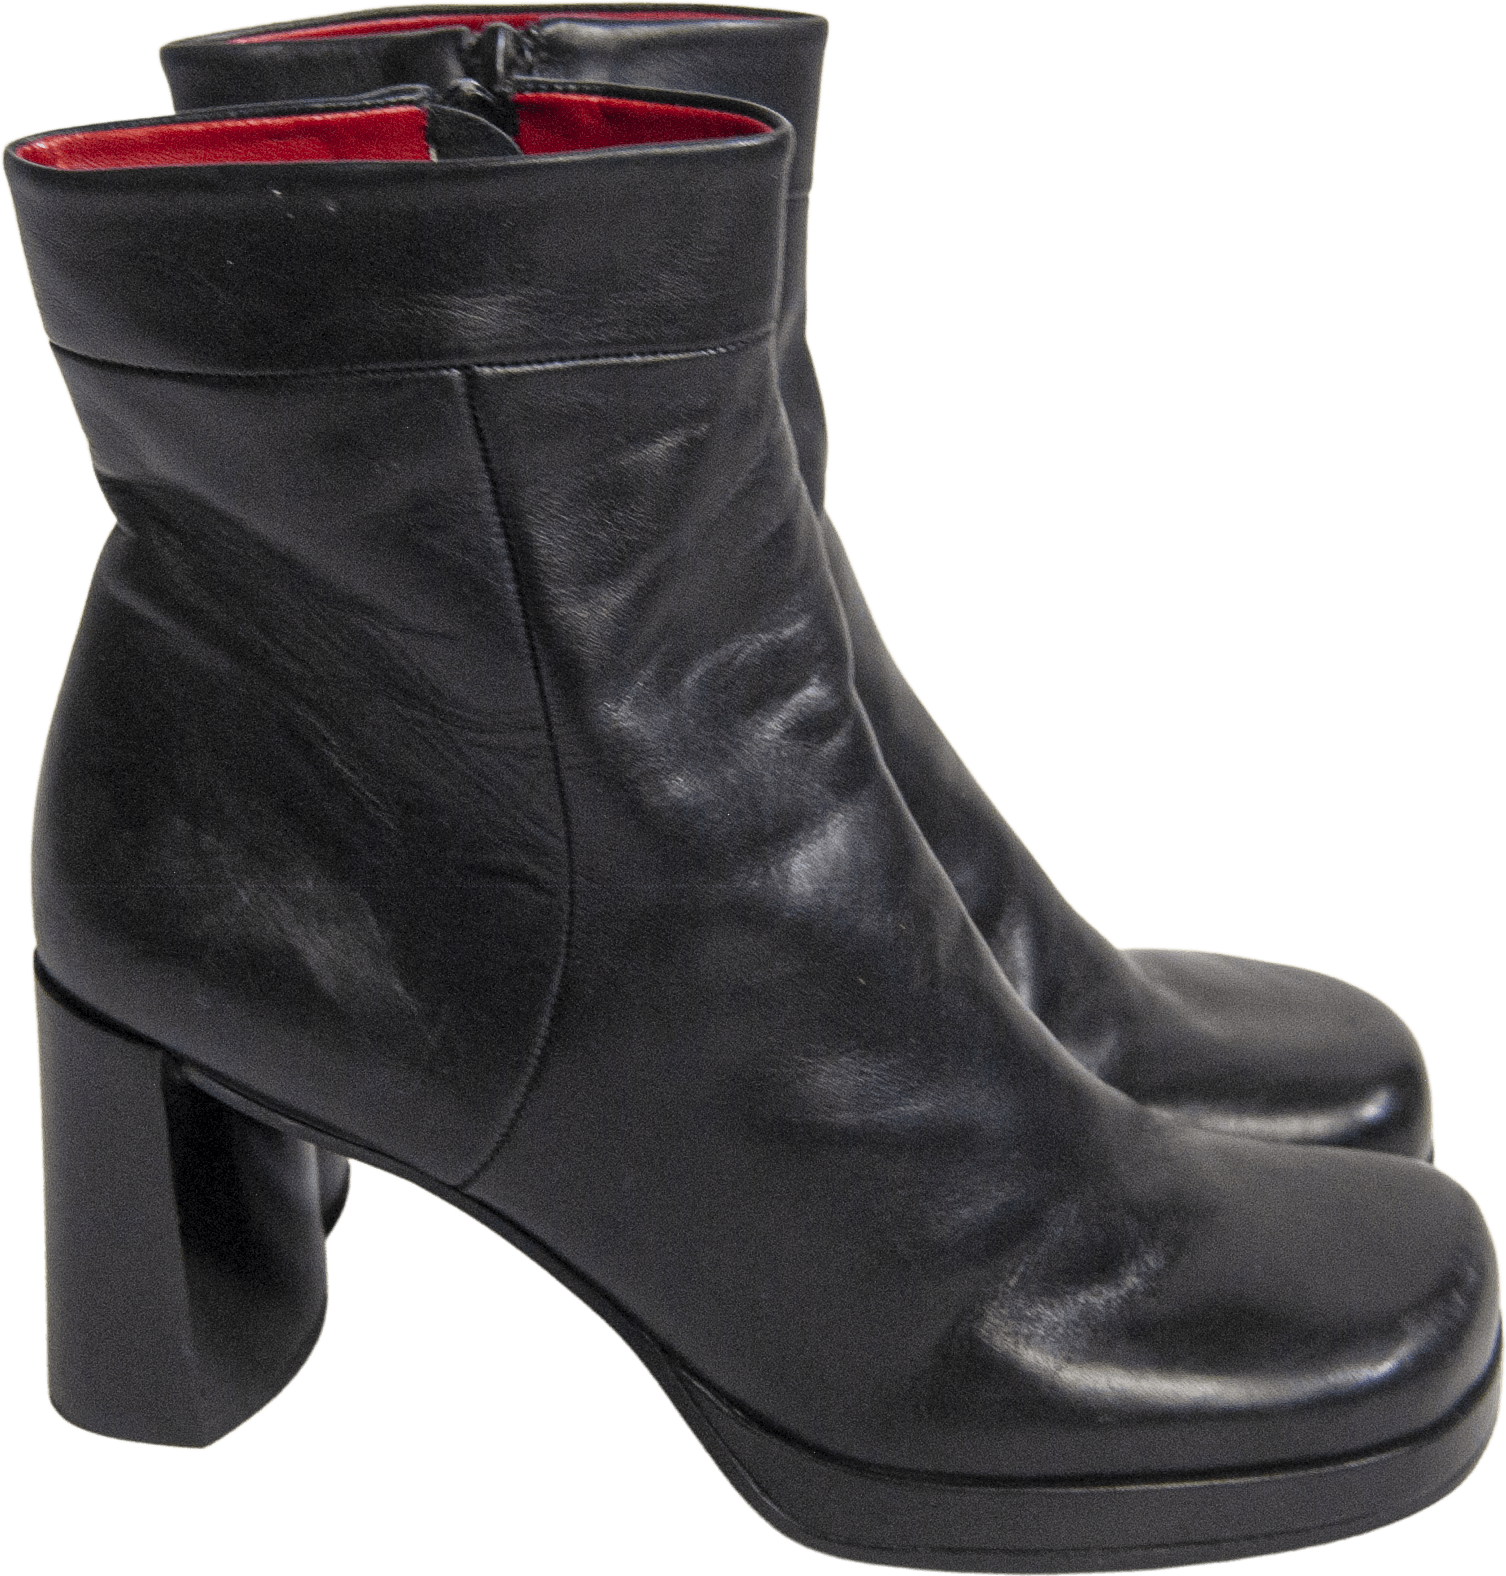 Vintage 90’s Black Leather Stacked Boots by Enzo Angiolini | Shop THRILLING